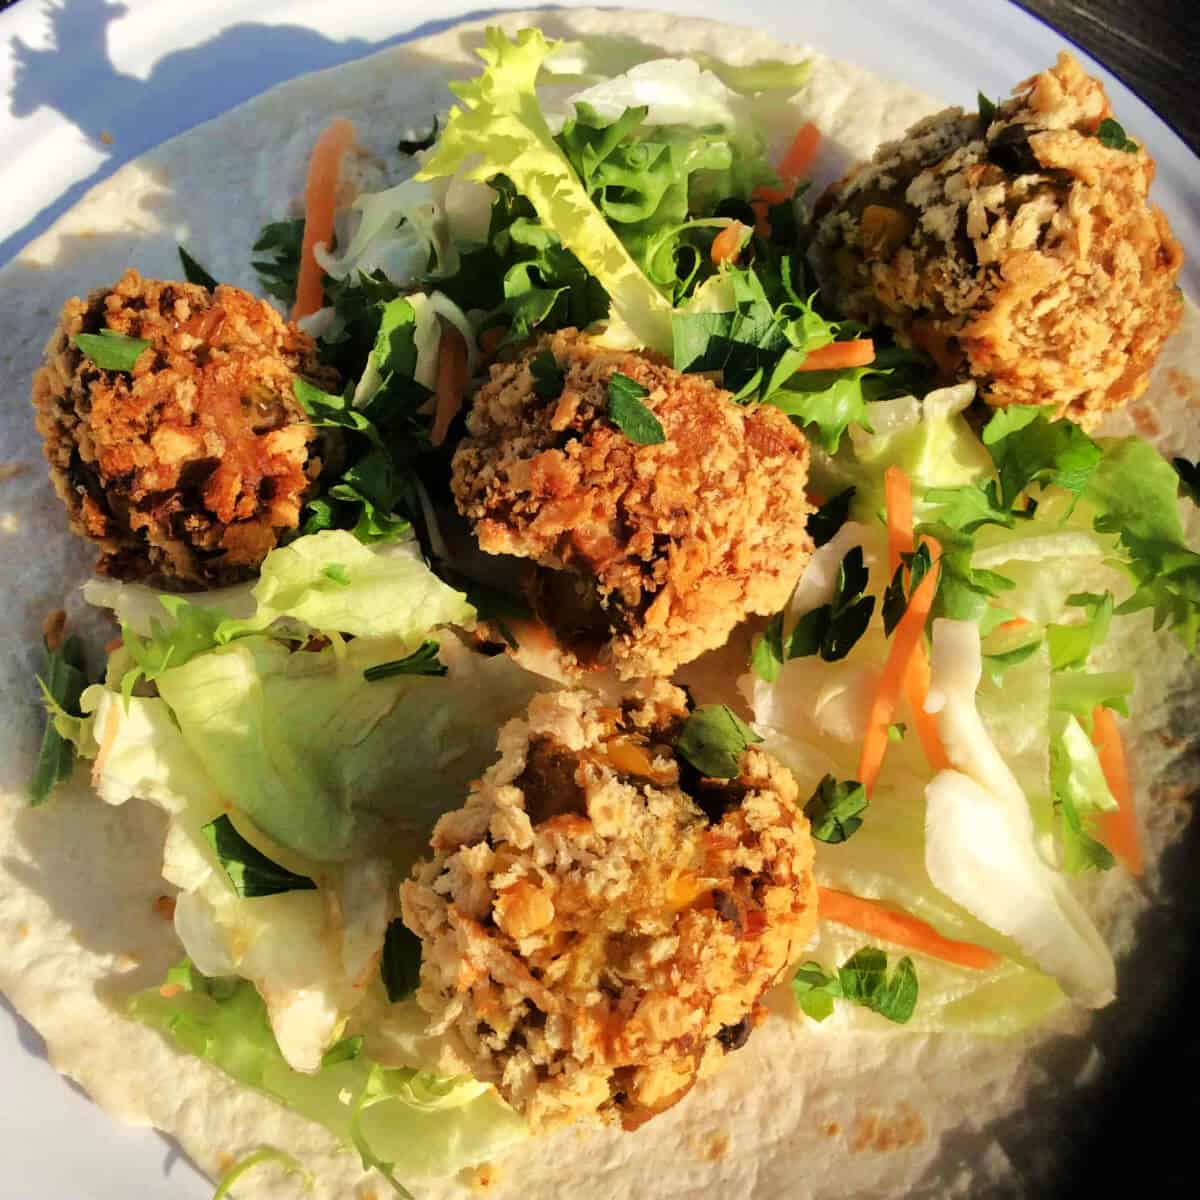 Croquettes with lettuce on a tortilla wrap.